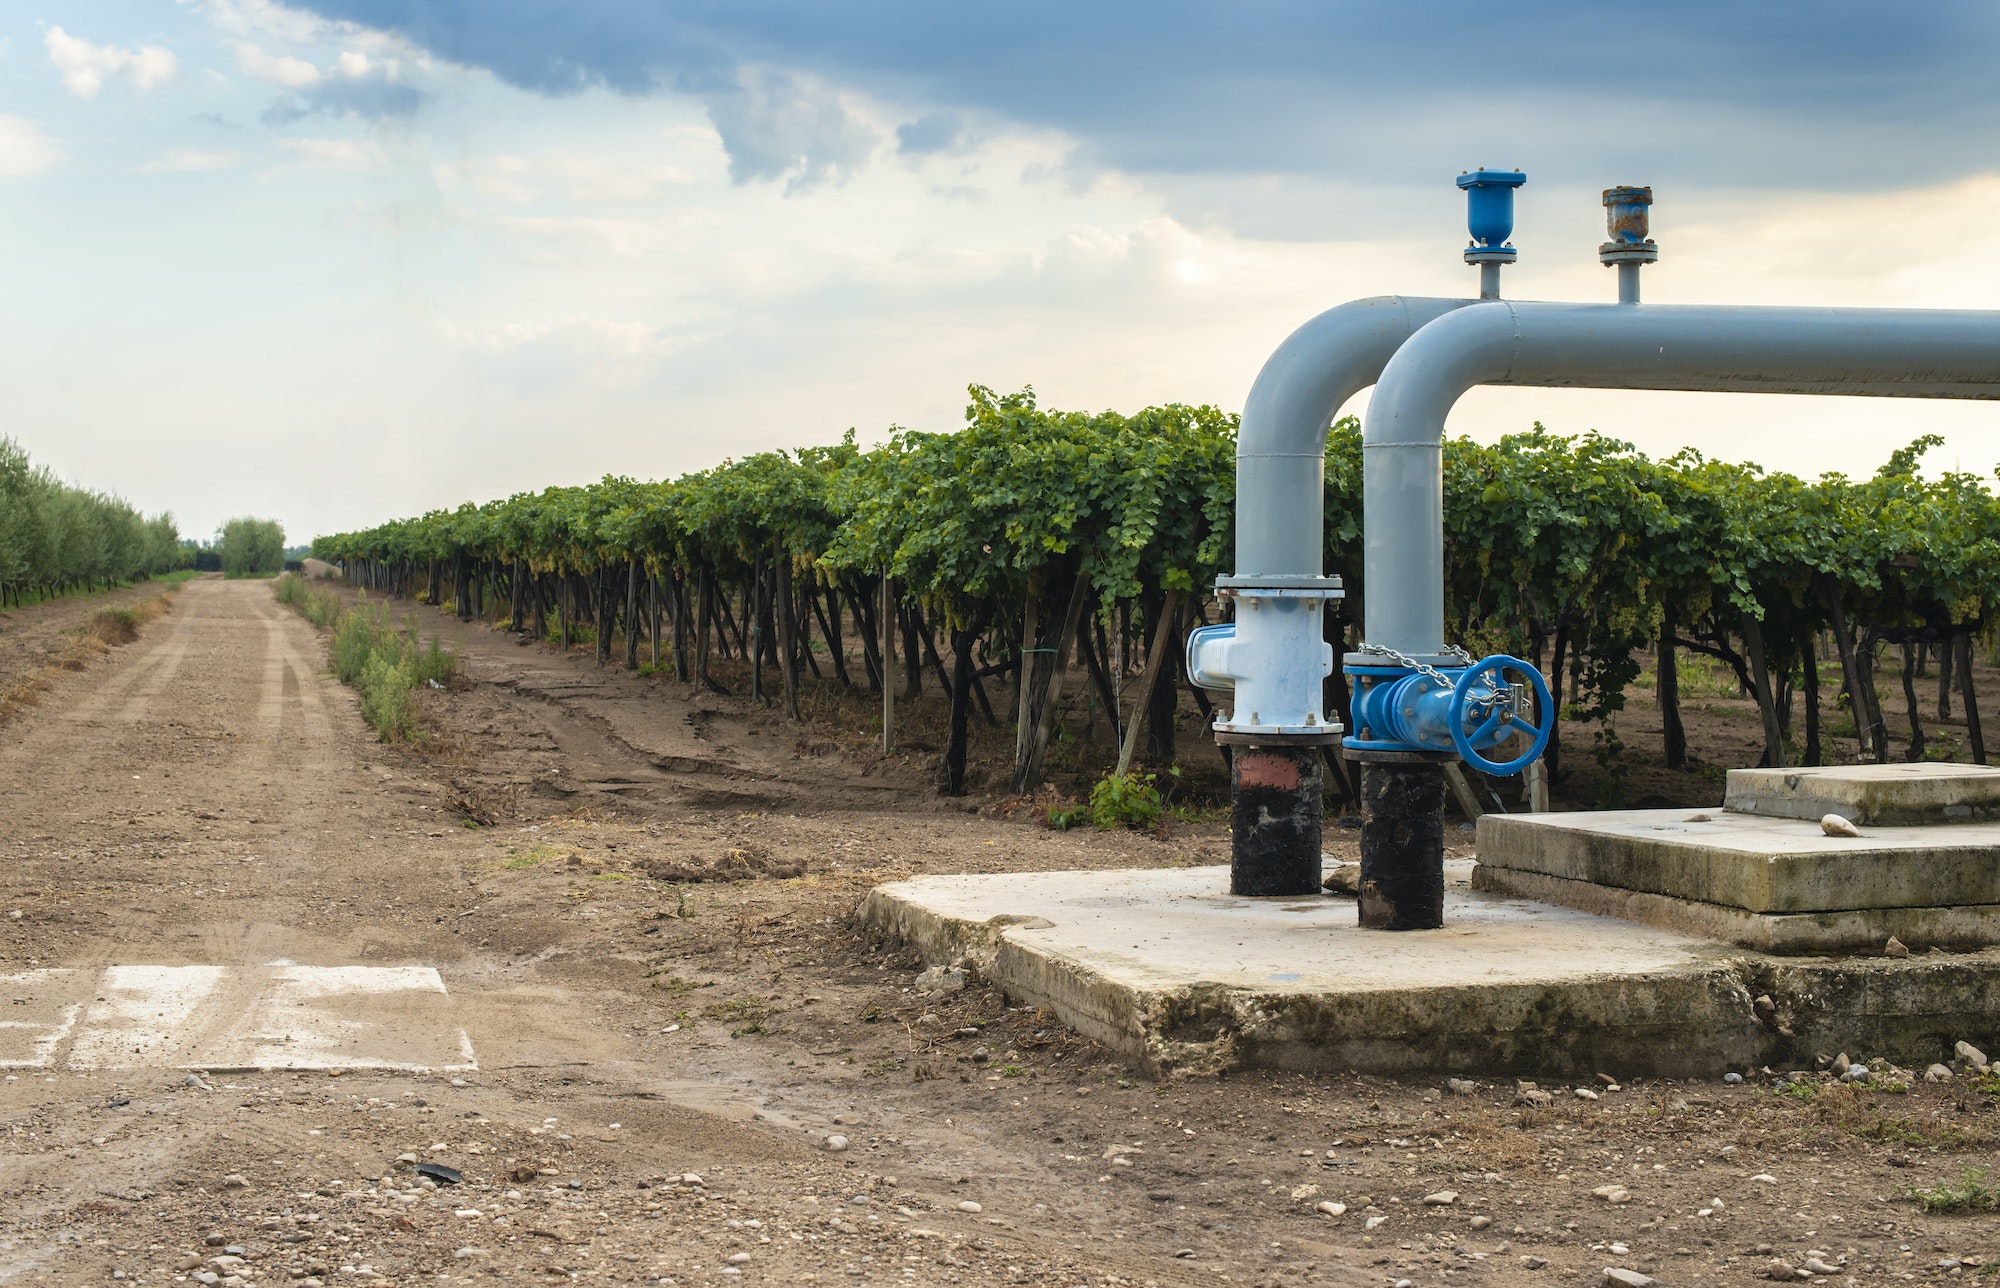 Watering pipes and vineyard.